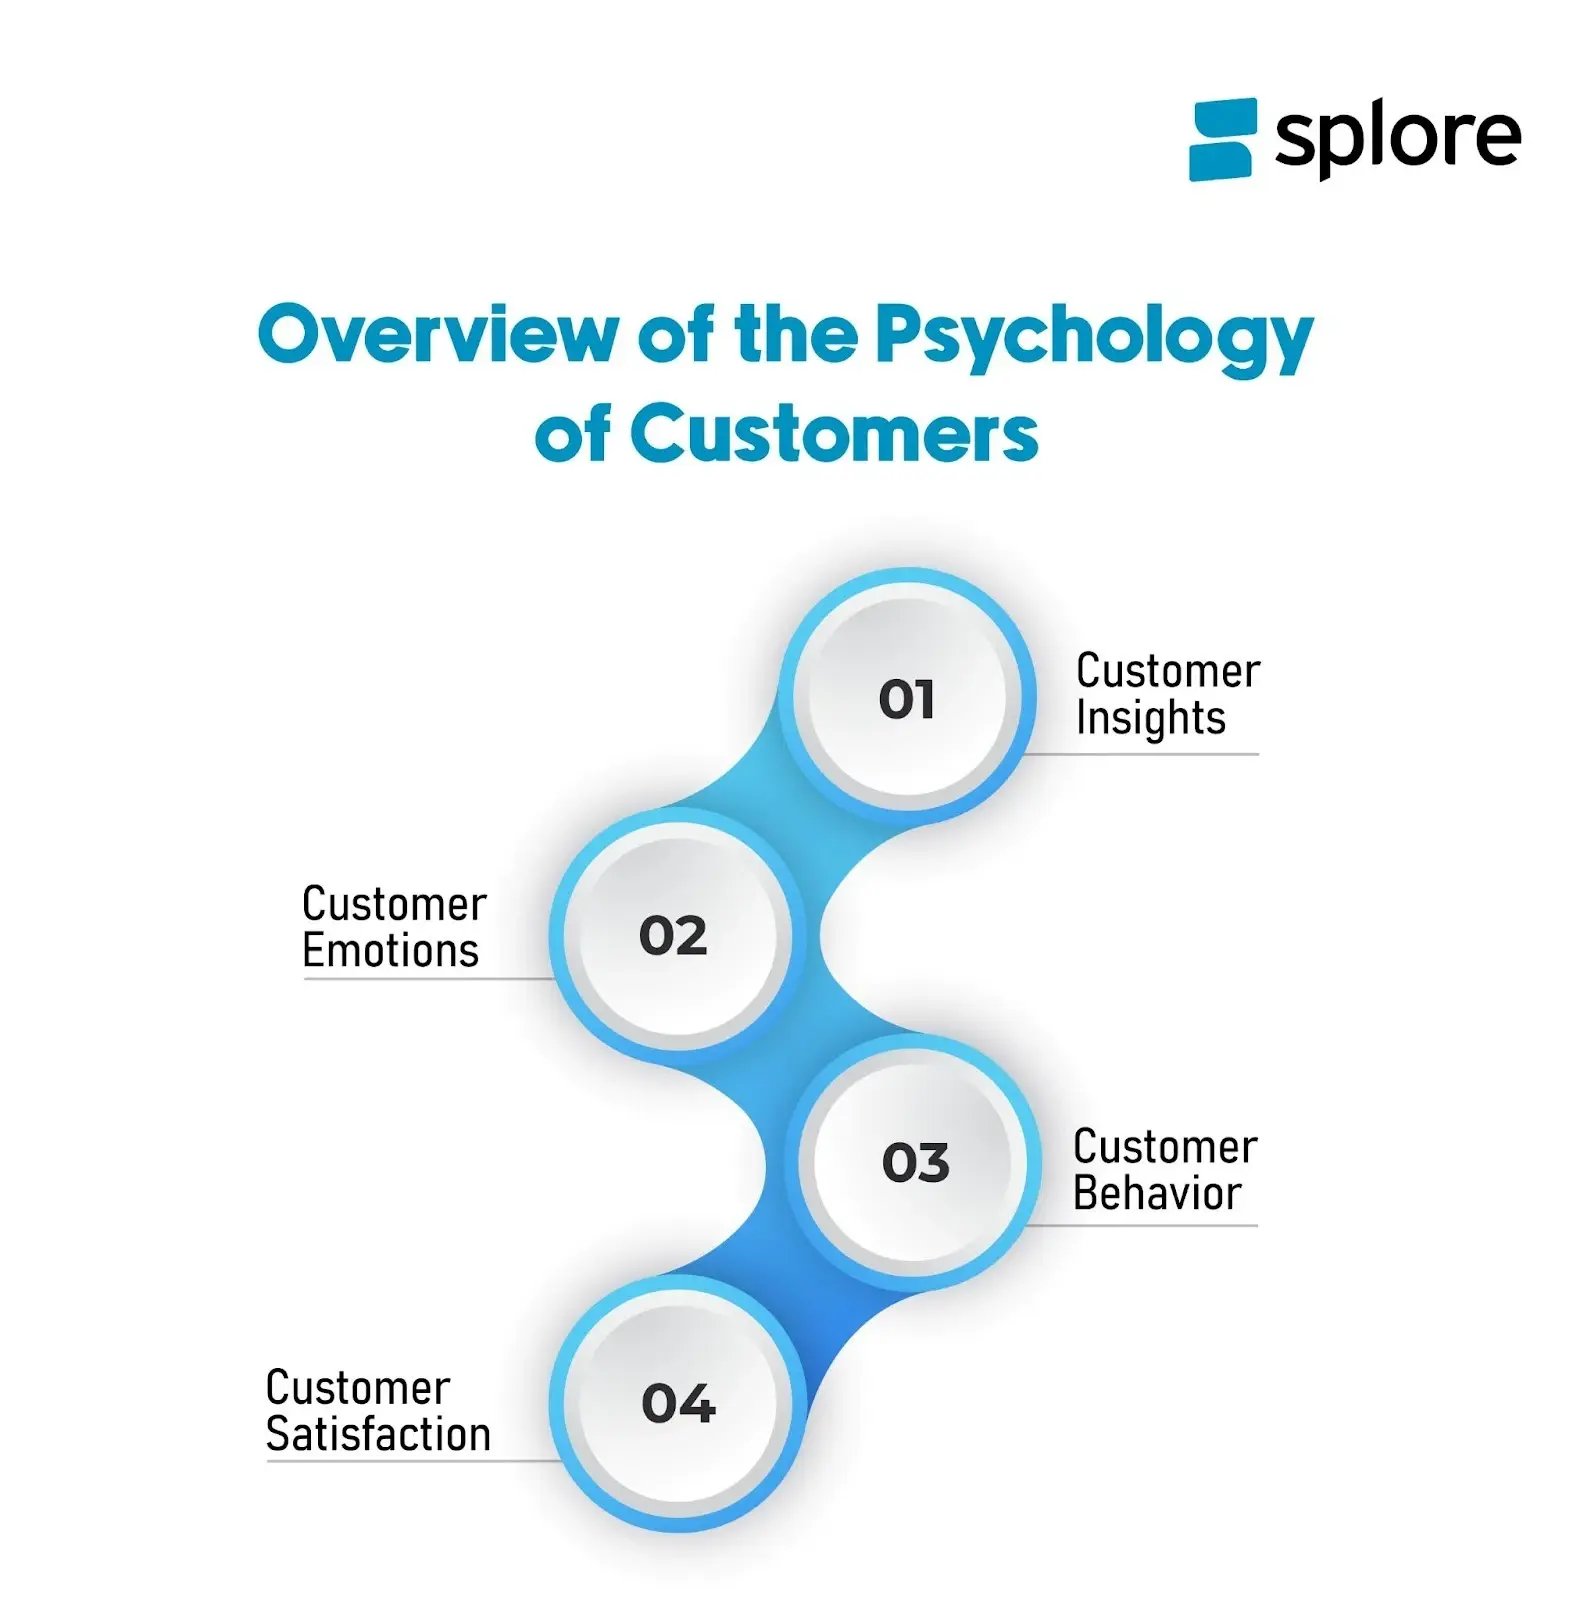 Overview of Psychology of Customer Engagement